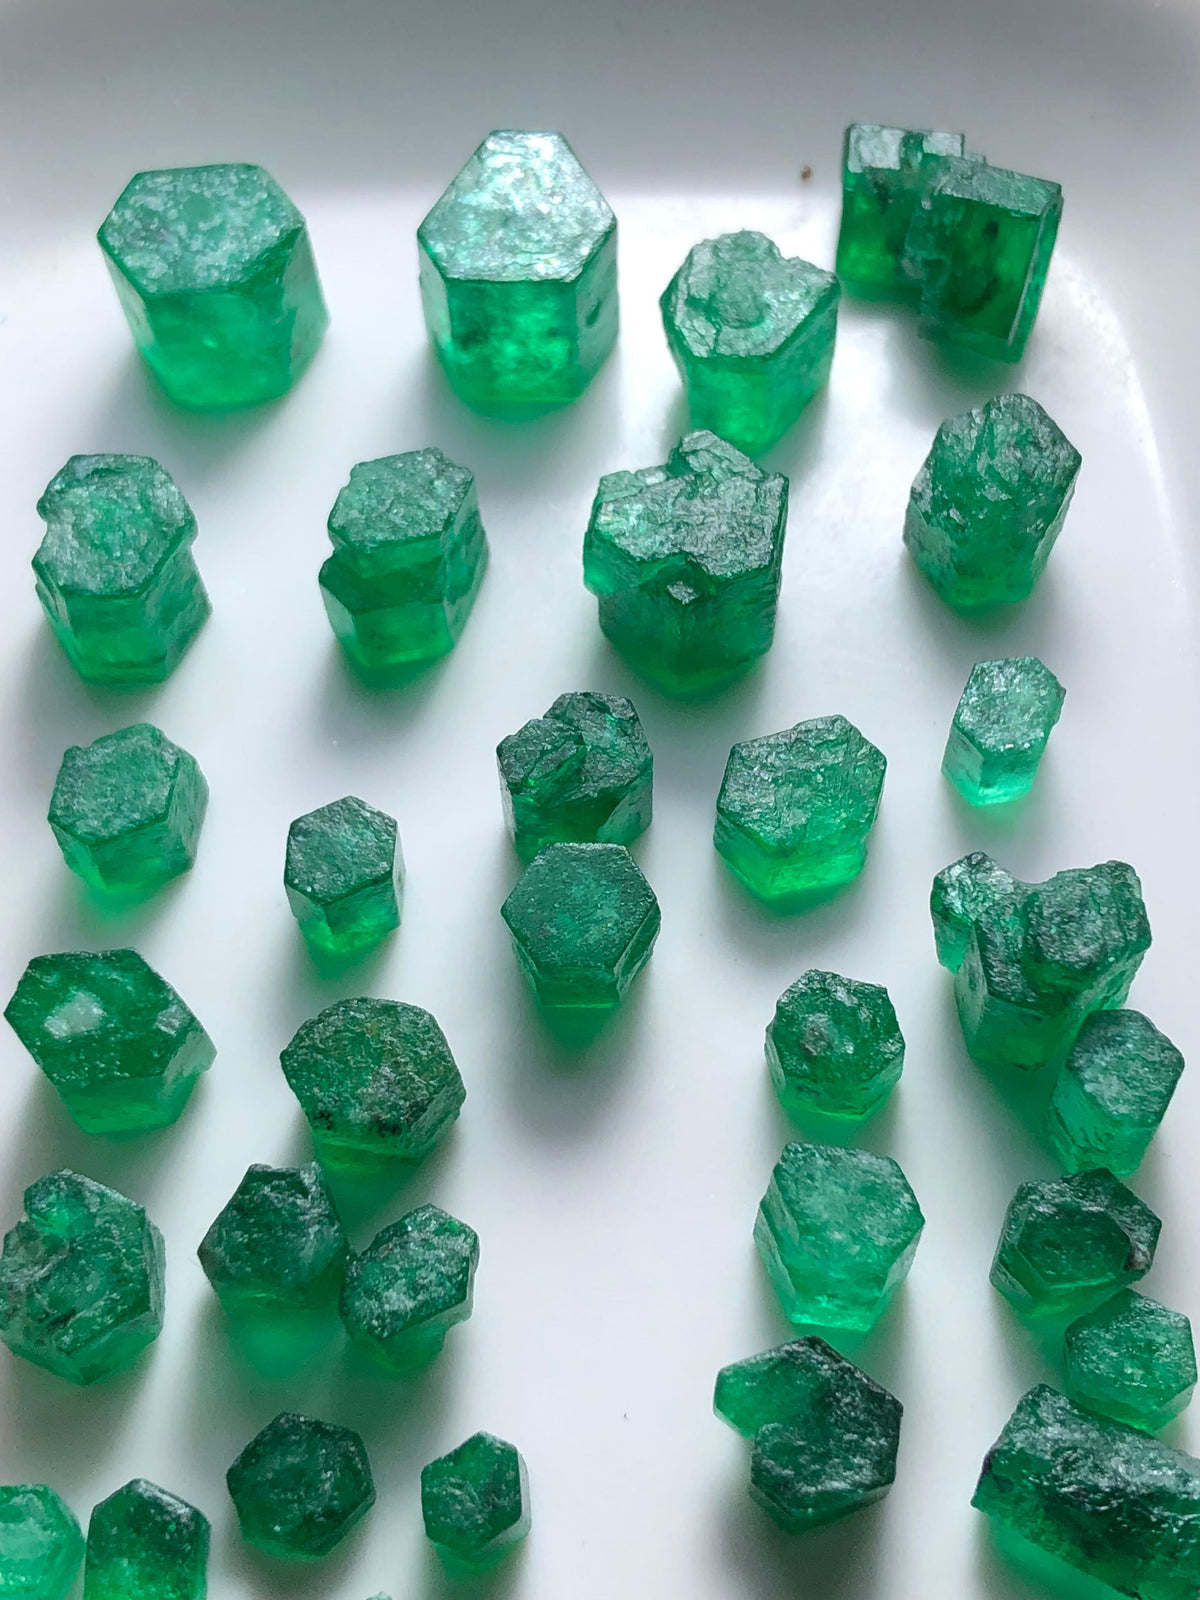 You Also May Like These Emerald stones.